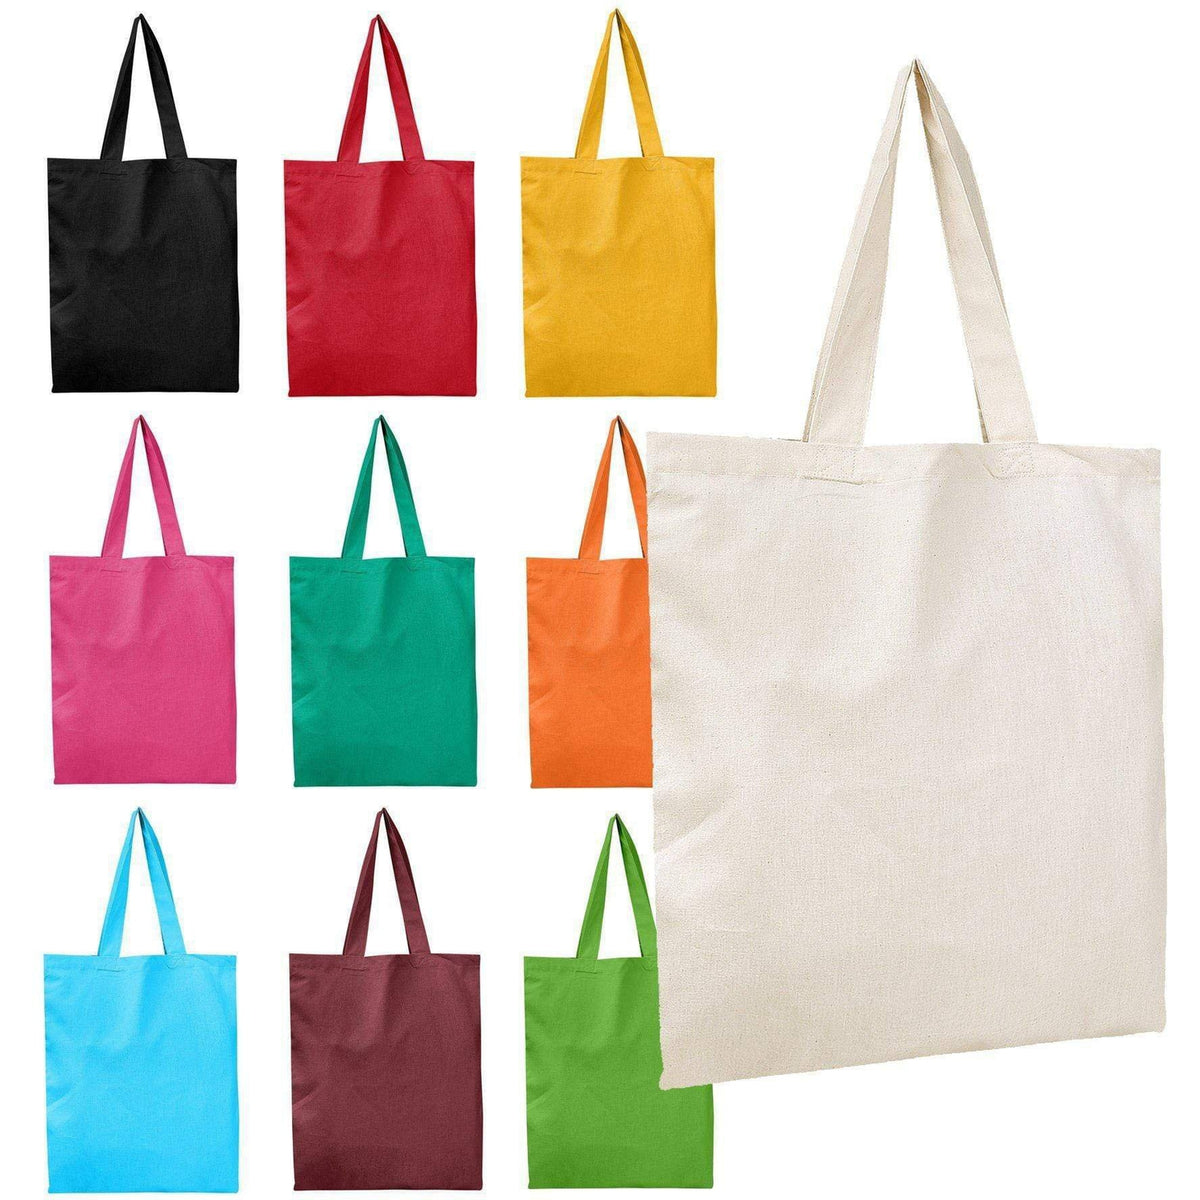 Set of 100 Cotton Tote Bags in Bulk, 100 Wholesale Cotton Tote Bags